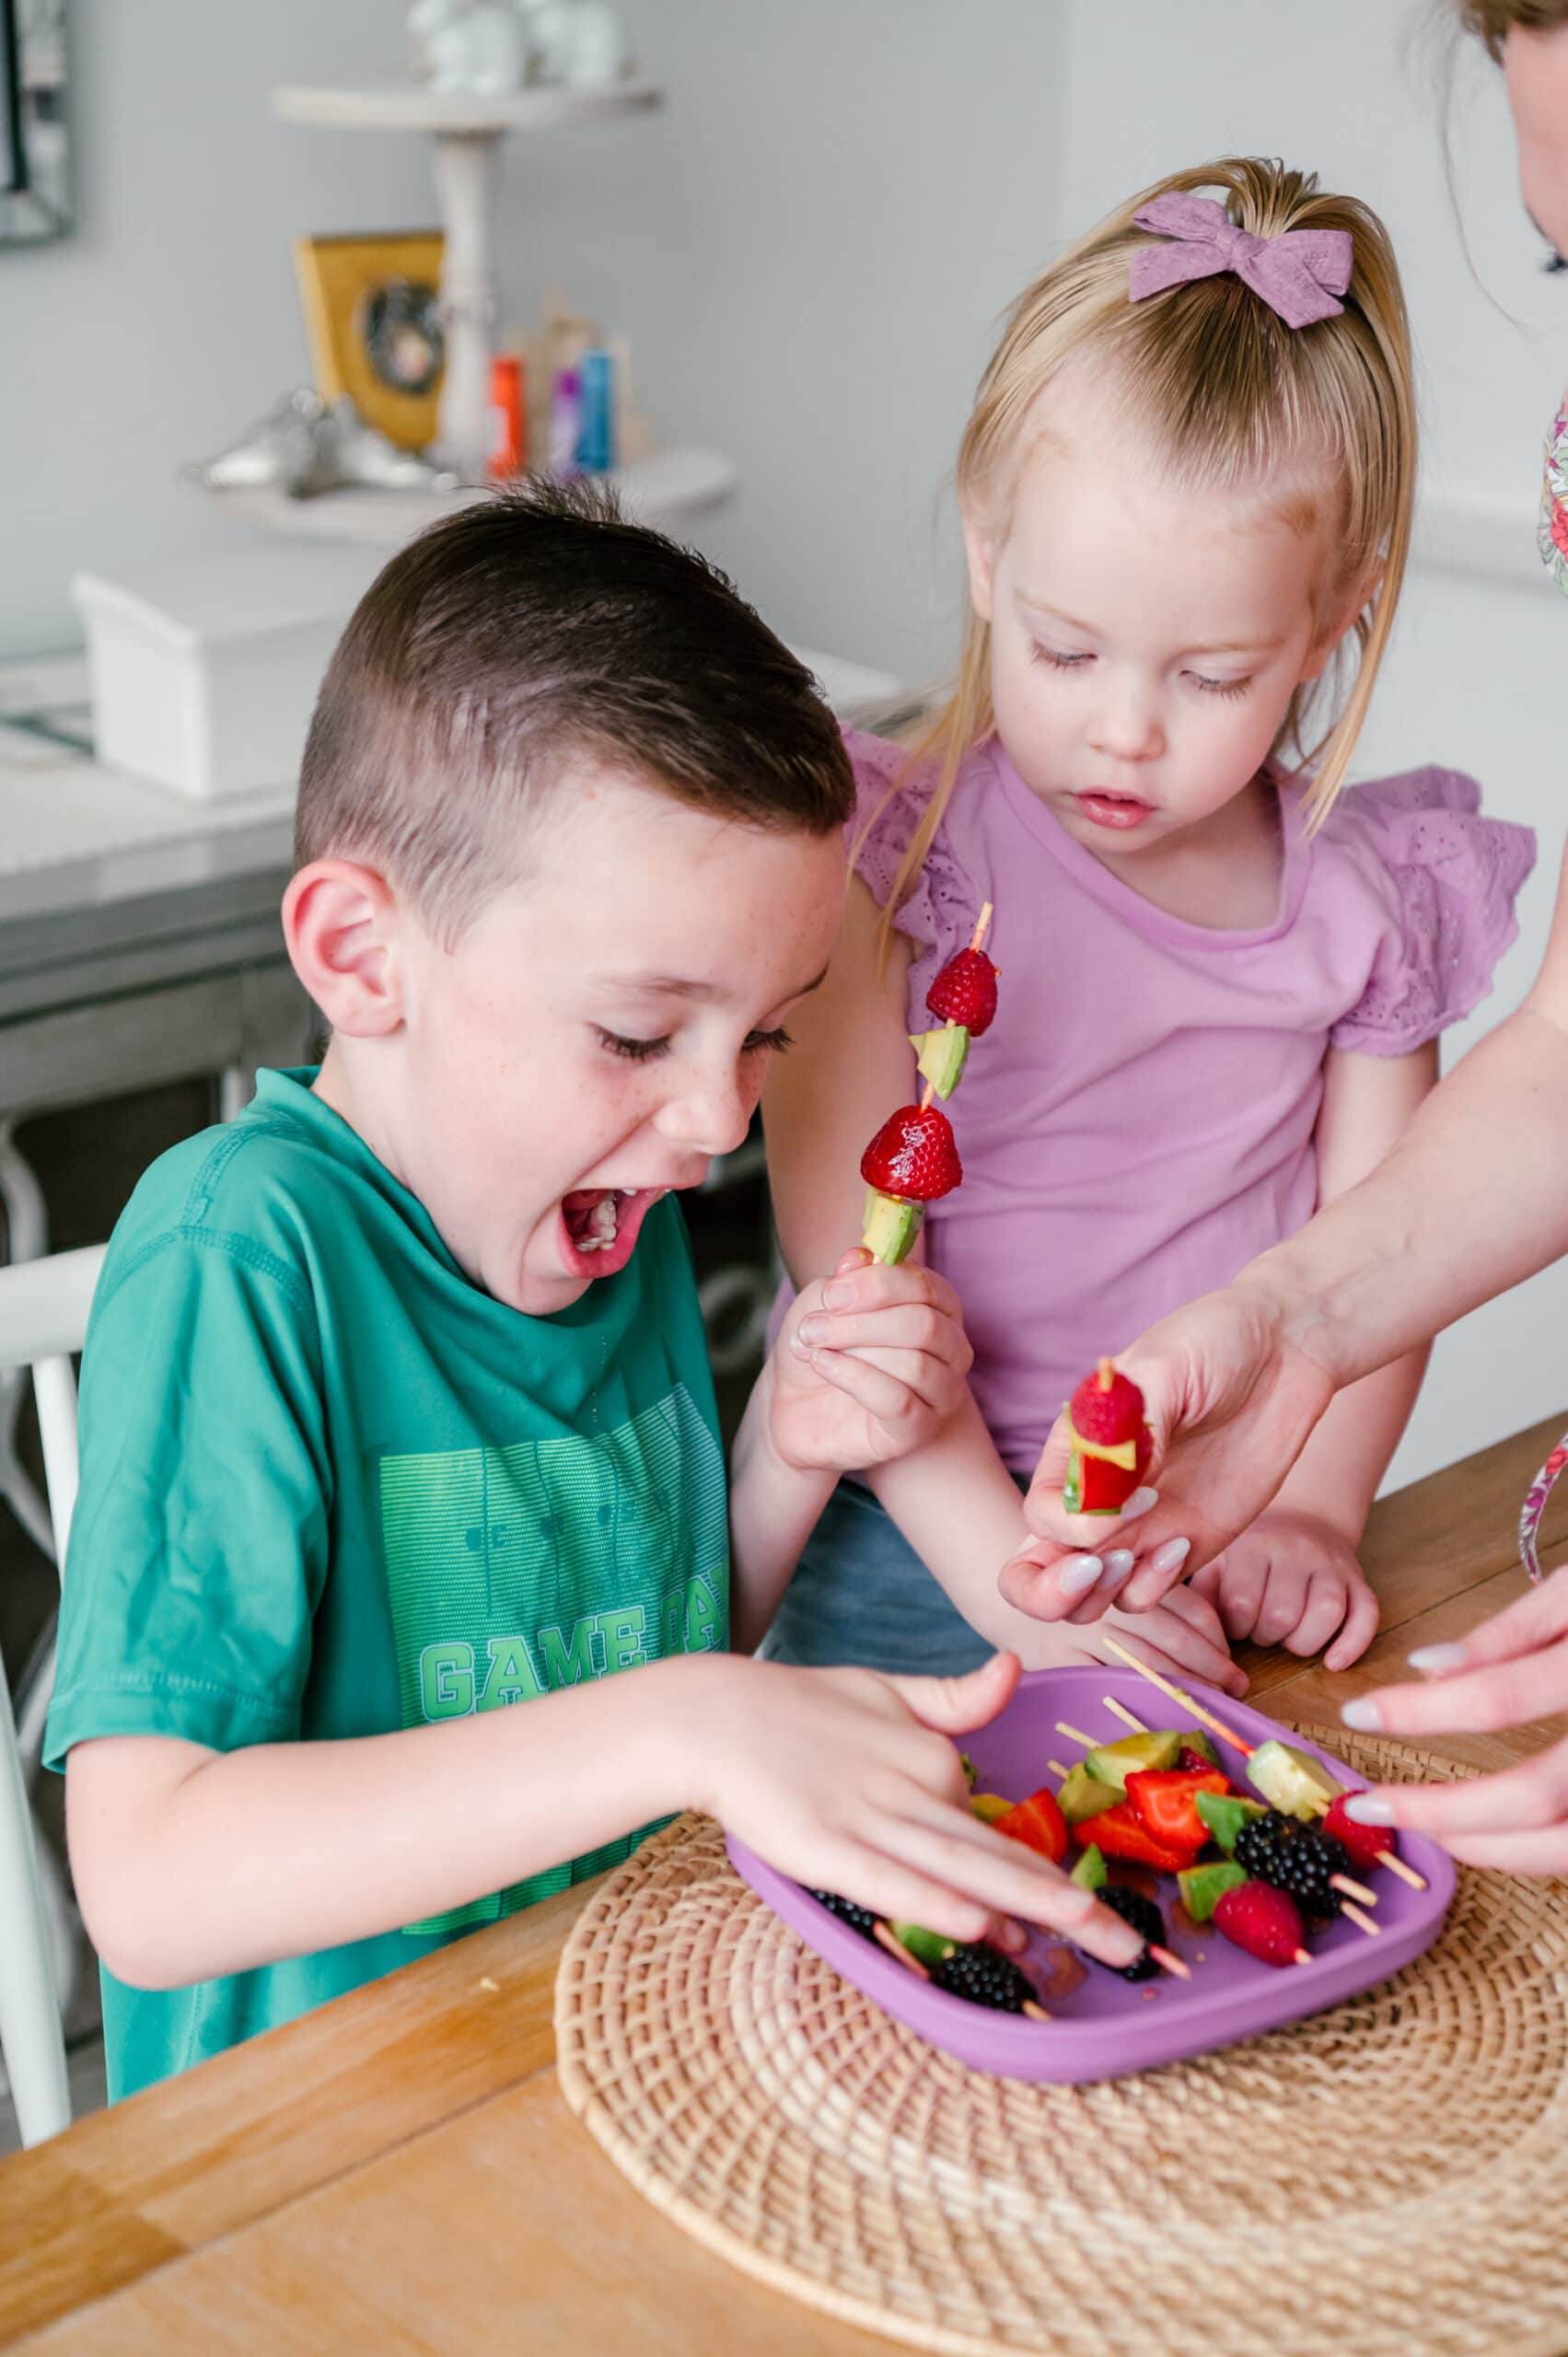 Kids eating an avocado and berry snack on skewers